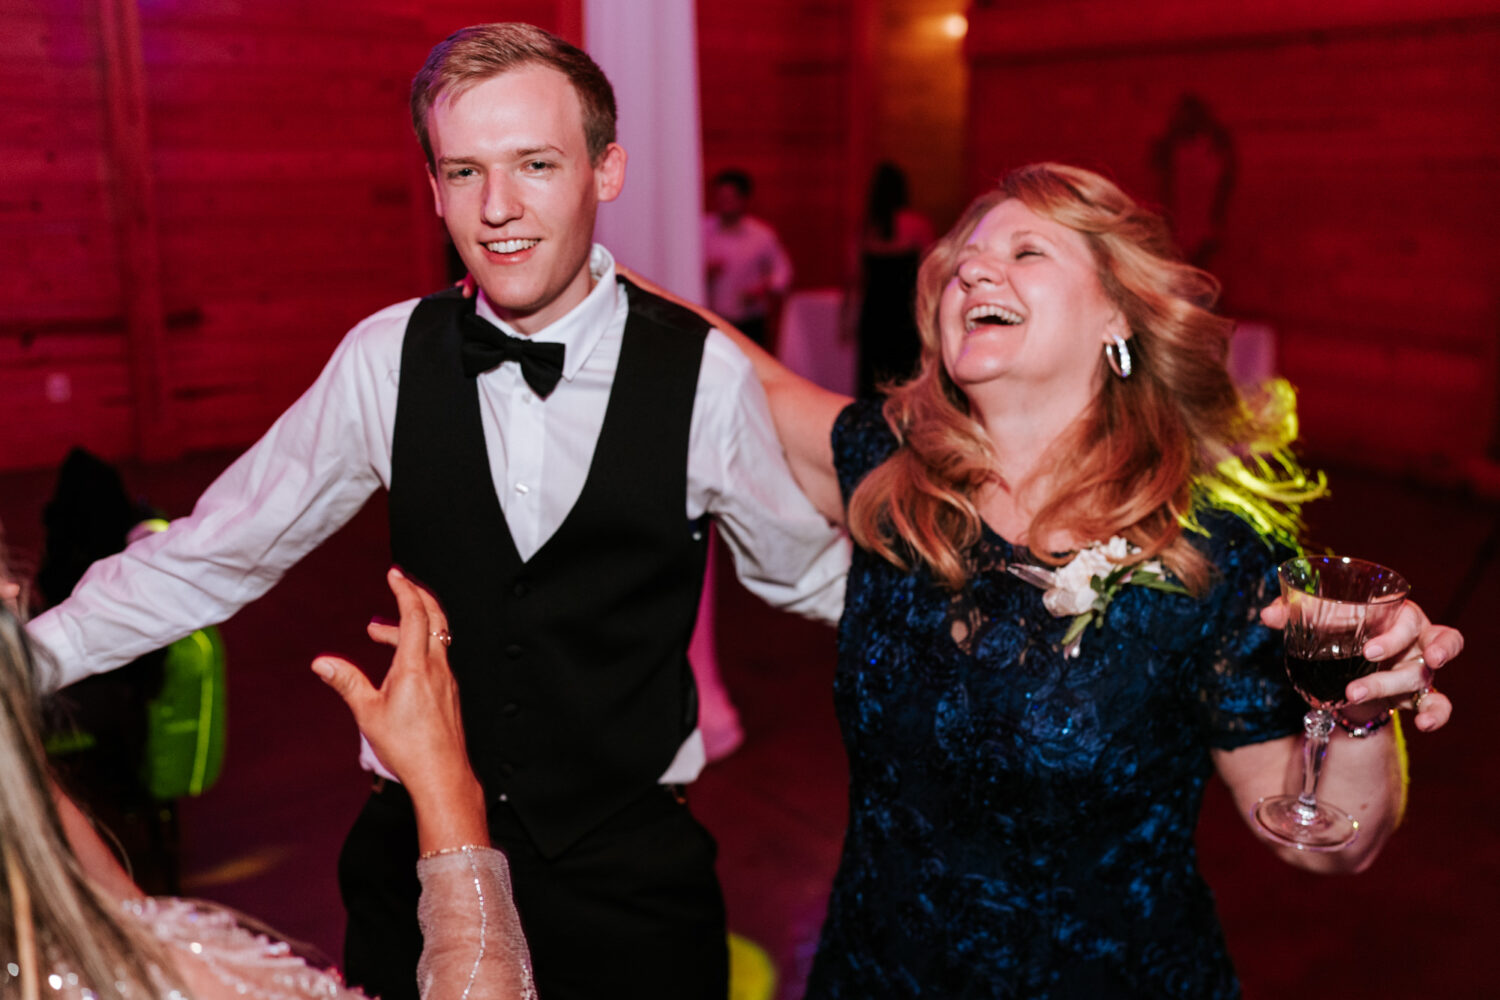 groom having fun on the dance floor with his mother and friends